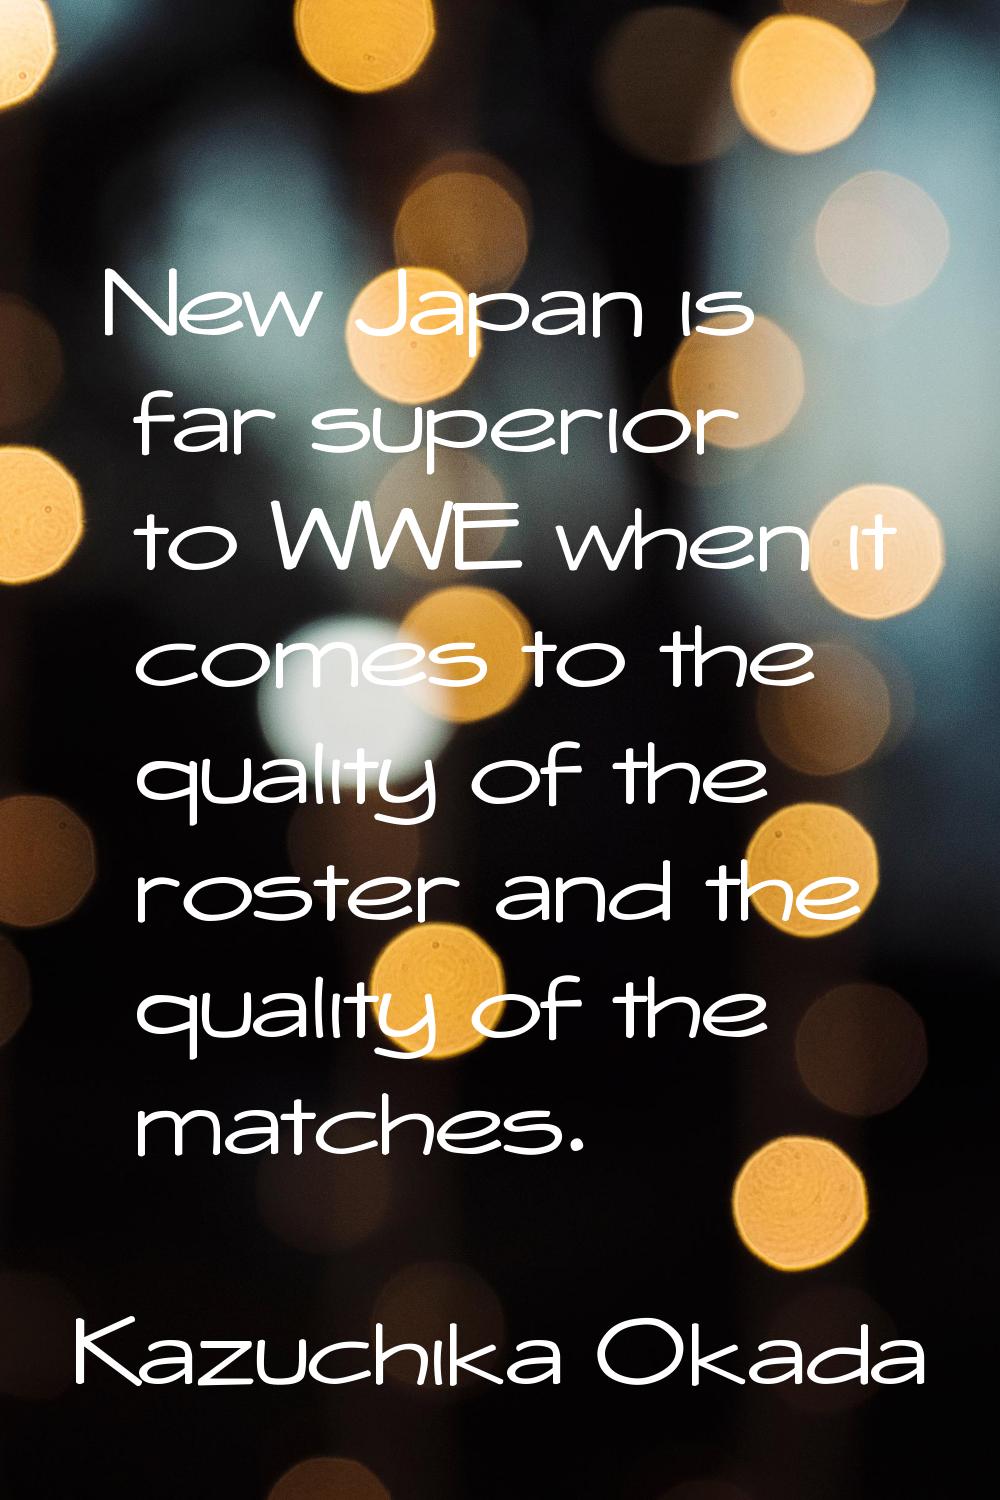 New Japan is far superior to WWE when it comes to the quality of the roster and the quality of the 